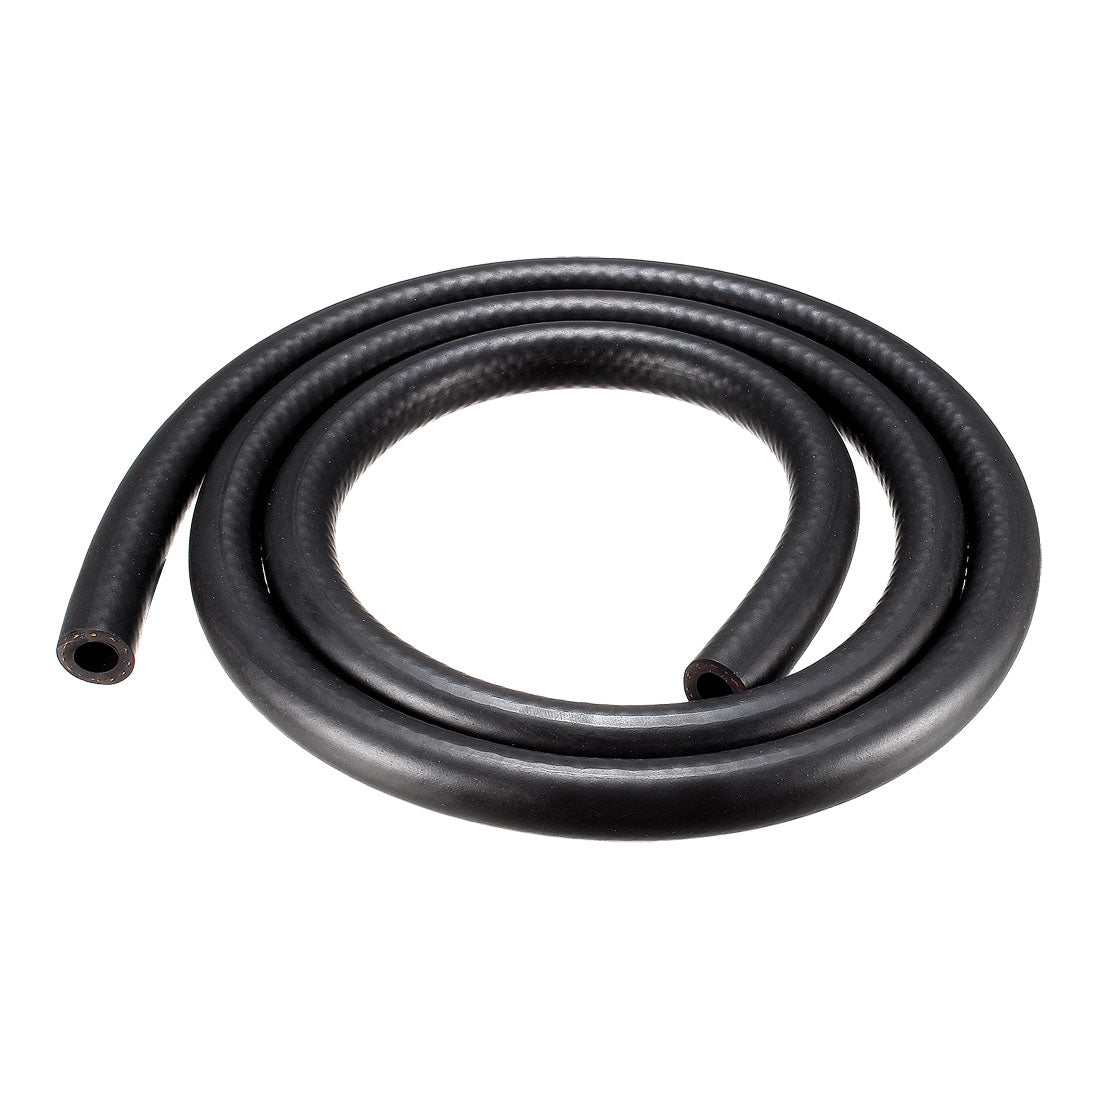 uxcell Uxcell Fuel Line Fuel Hose Rubber  10mm I.D.  1.5M/4.9FT  Diesel Petrol Hose Engine Pipe Tubing